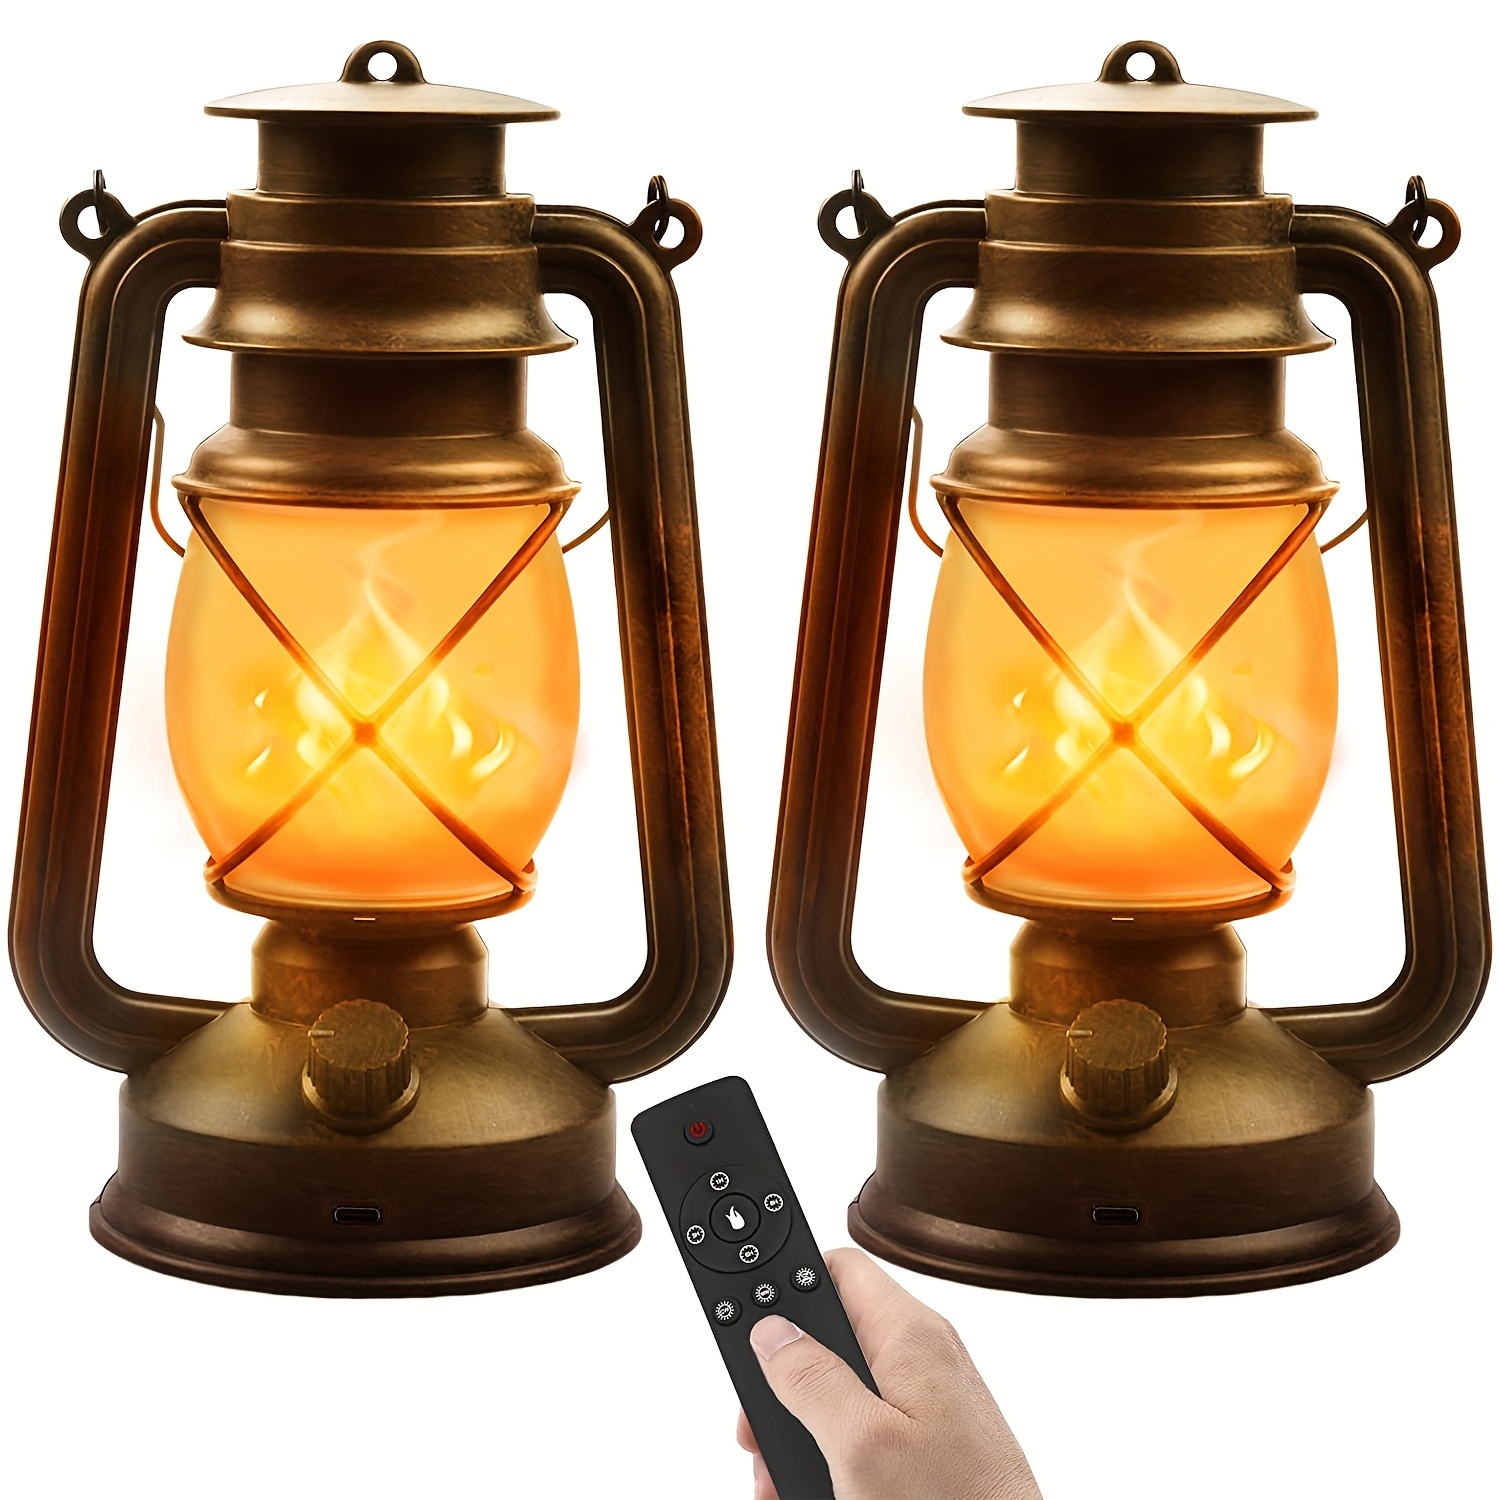 

2pack Flame Retro Lanterns, Led Battery Powered Camping Lamp Outdoor Hanging Lantern Flickering Flame Rechargeable Retro Lanterns Remote Control 4 Modes Light Non-solar